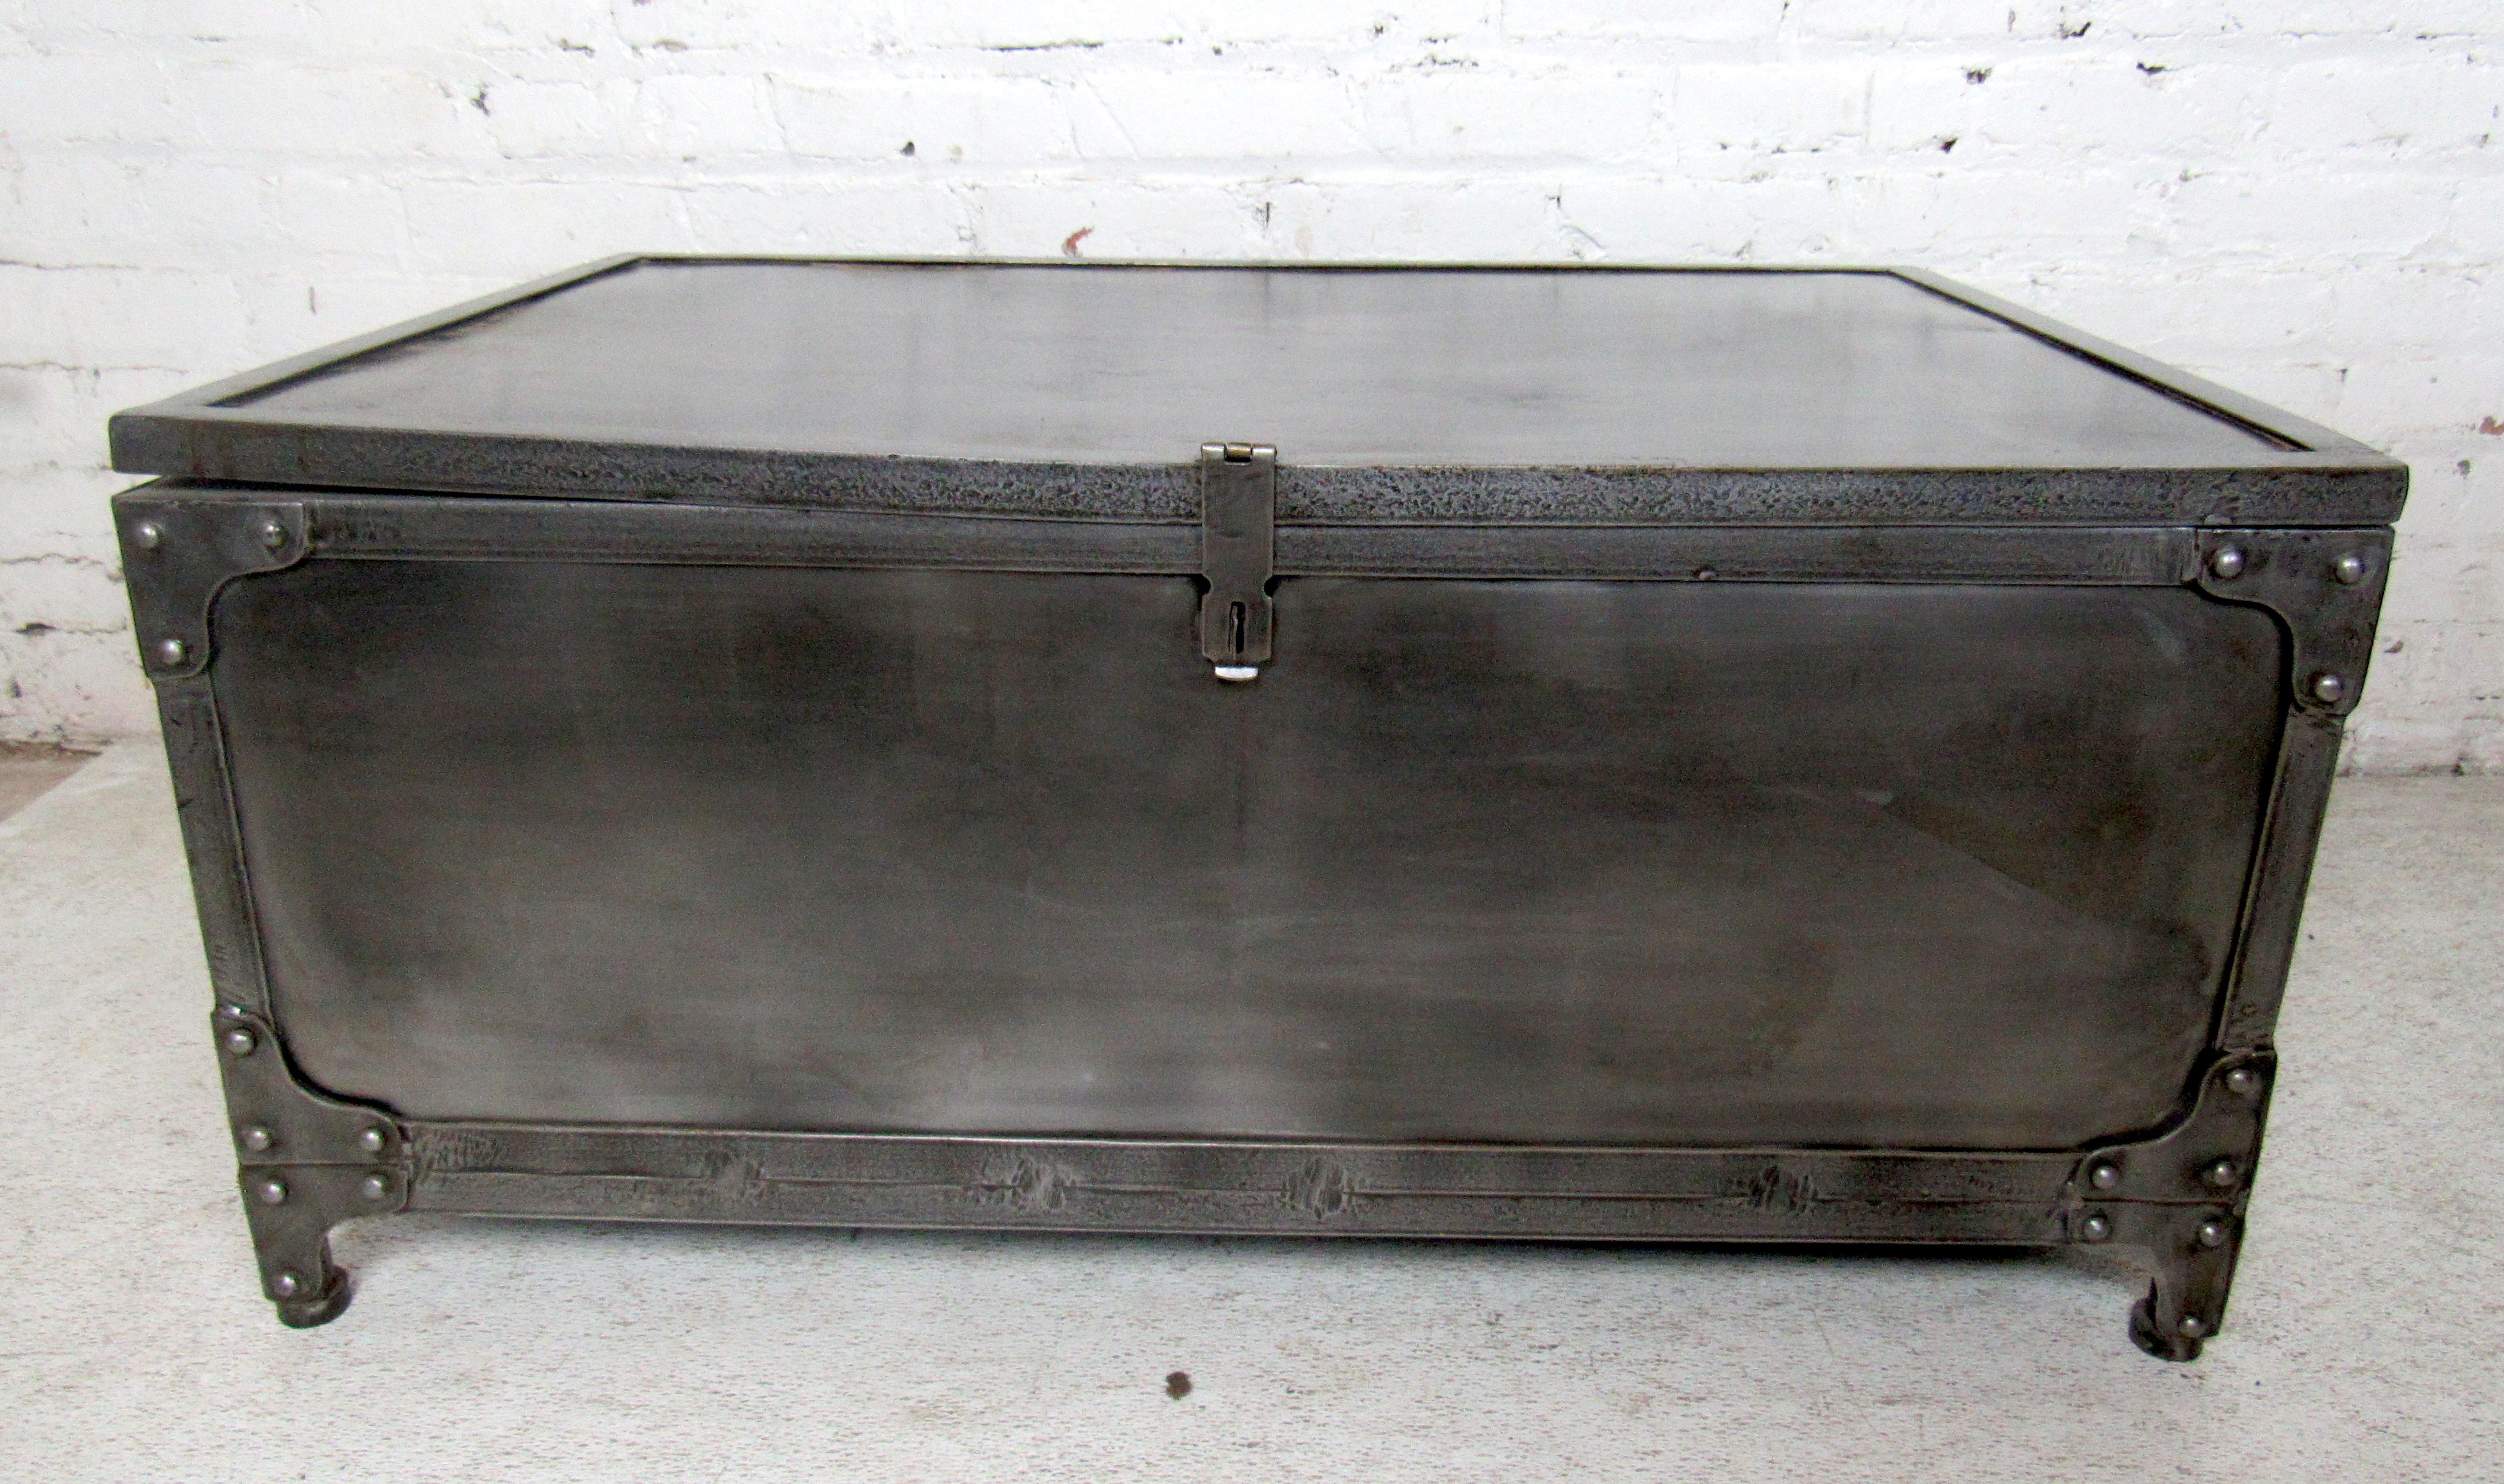 Vintage industrial metal storage trunk featuring a latch, and large spacious chest.

(Please confirm item location - NY or NJ - with dealer).